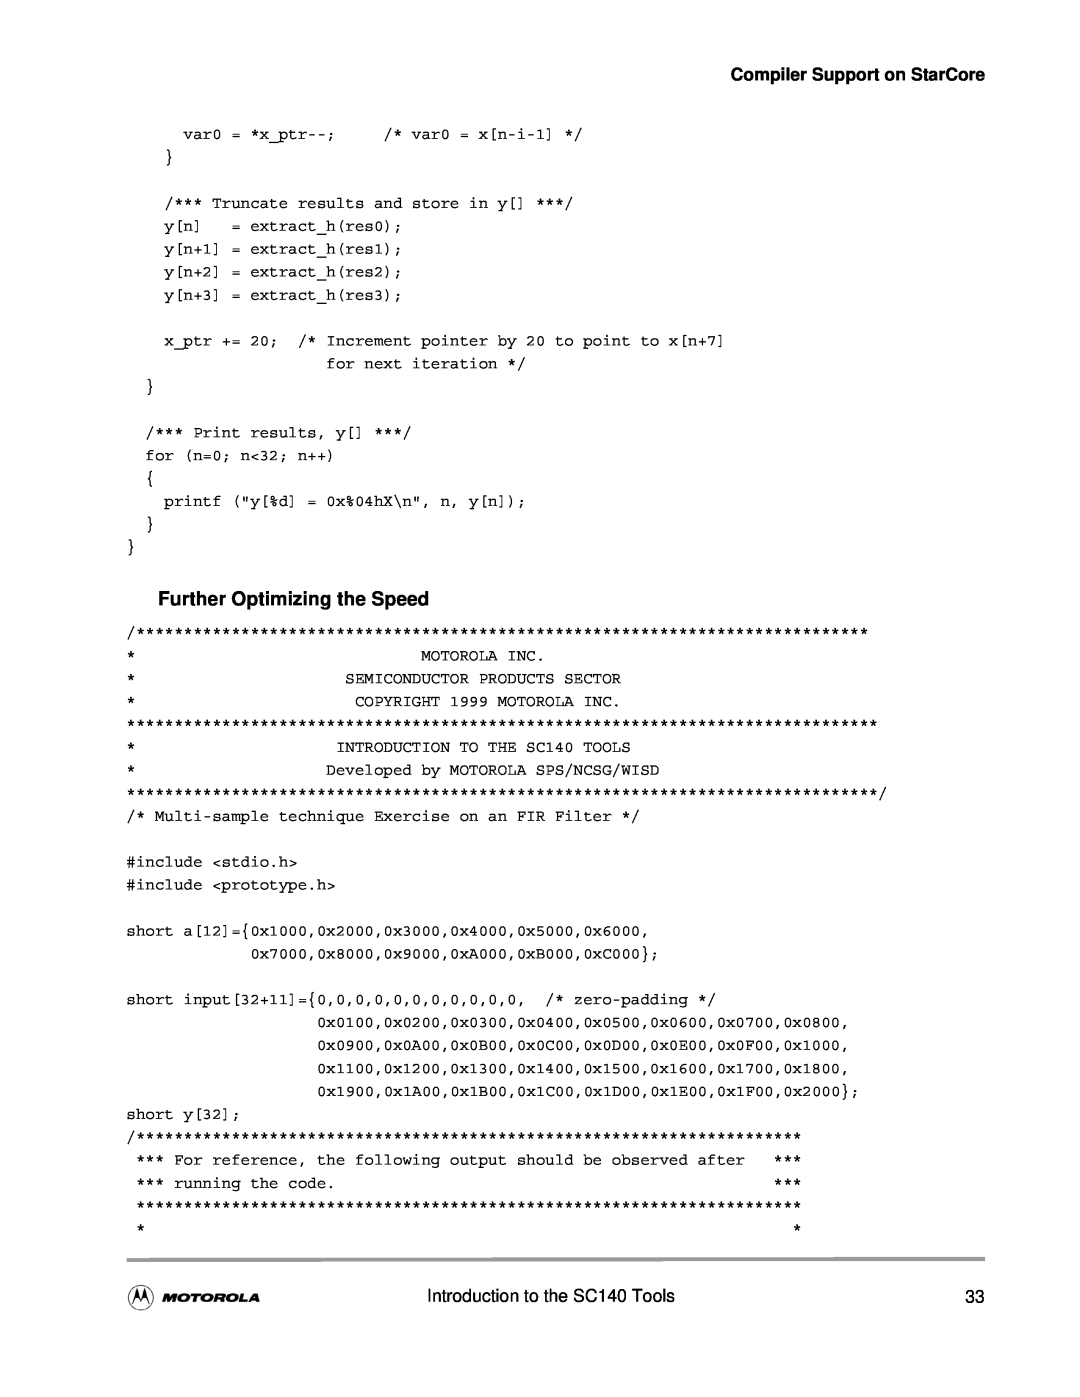 Motorola SC140 user manual Further Optimizing the Speed, Compiler Support on StarCore, short y32 